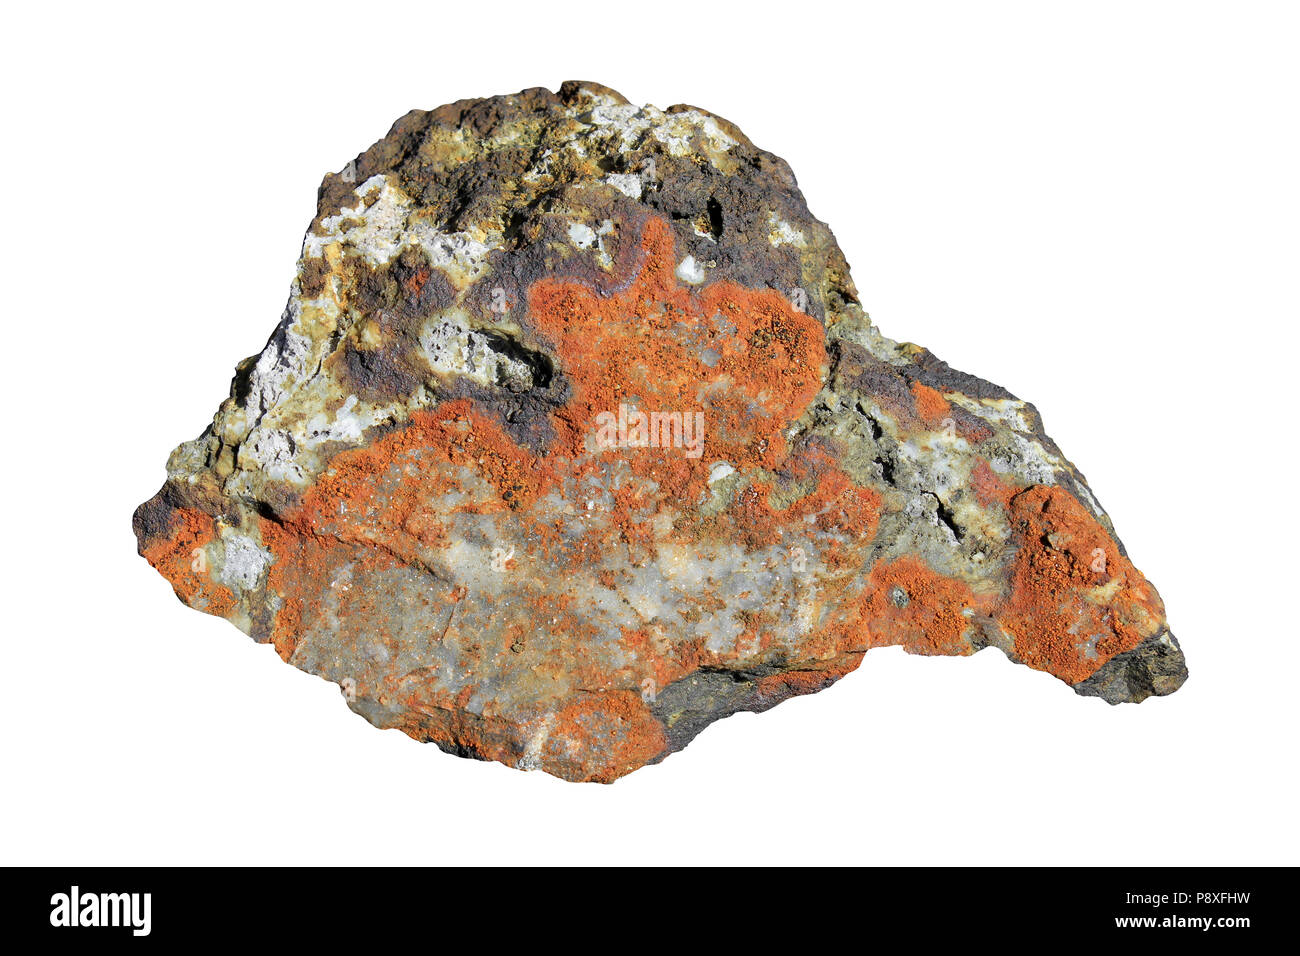 Volcanogenic Massive Sulfide (VMS) Ore (Copper, Zinc, Lead) Deposit from Parys Mountain, Anglesey Stock Photo